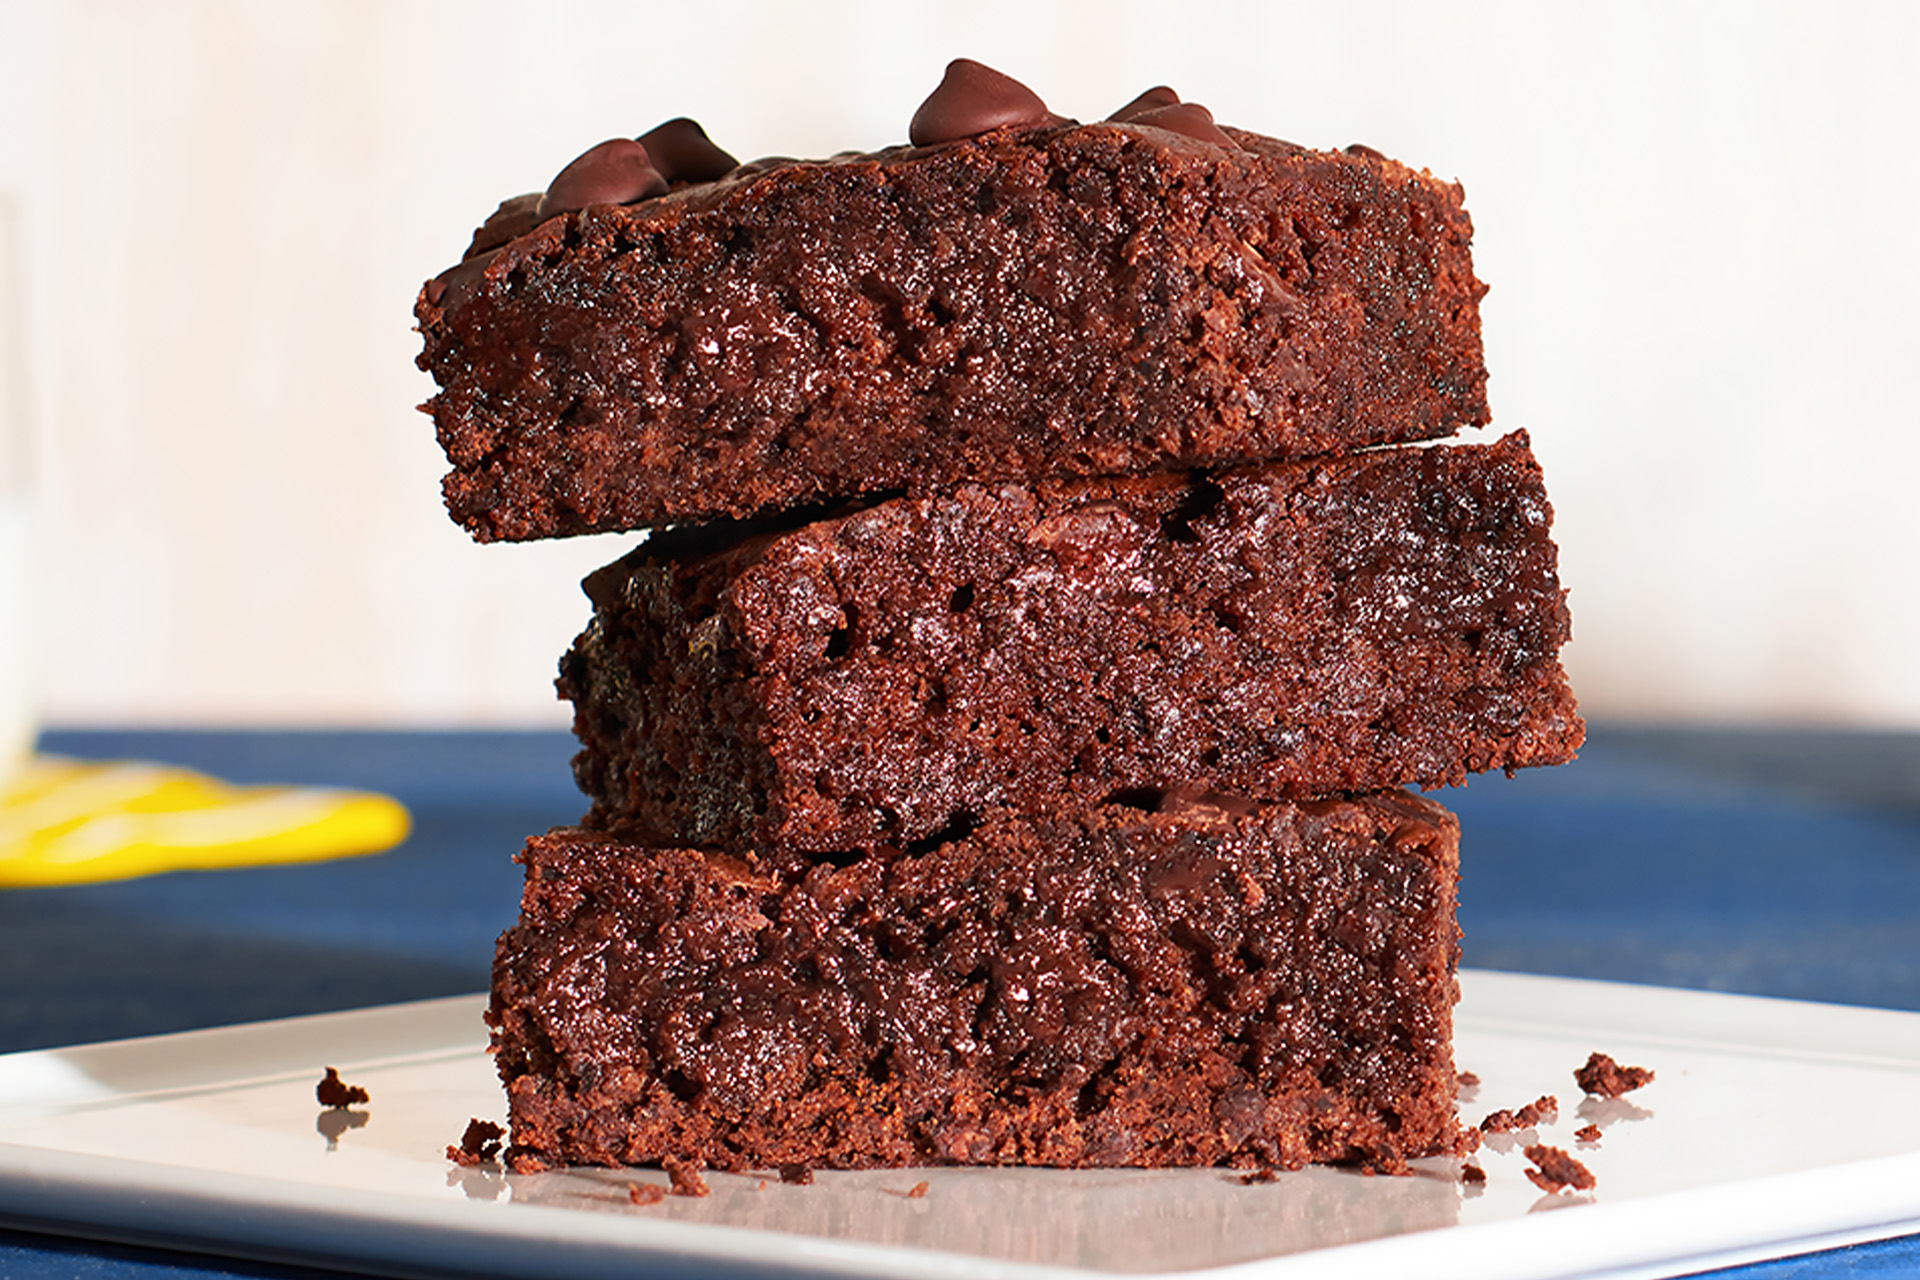 A close-up of three black bean and dark chocolate brownies stacked on top of each other